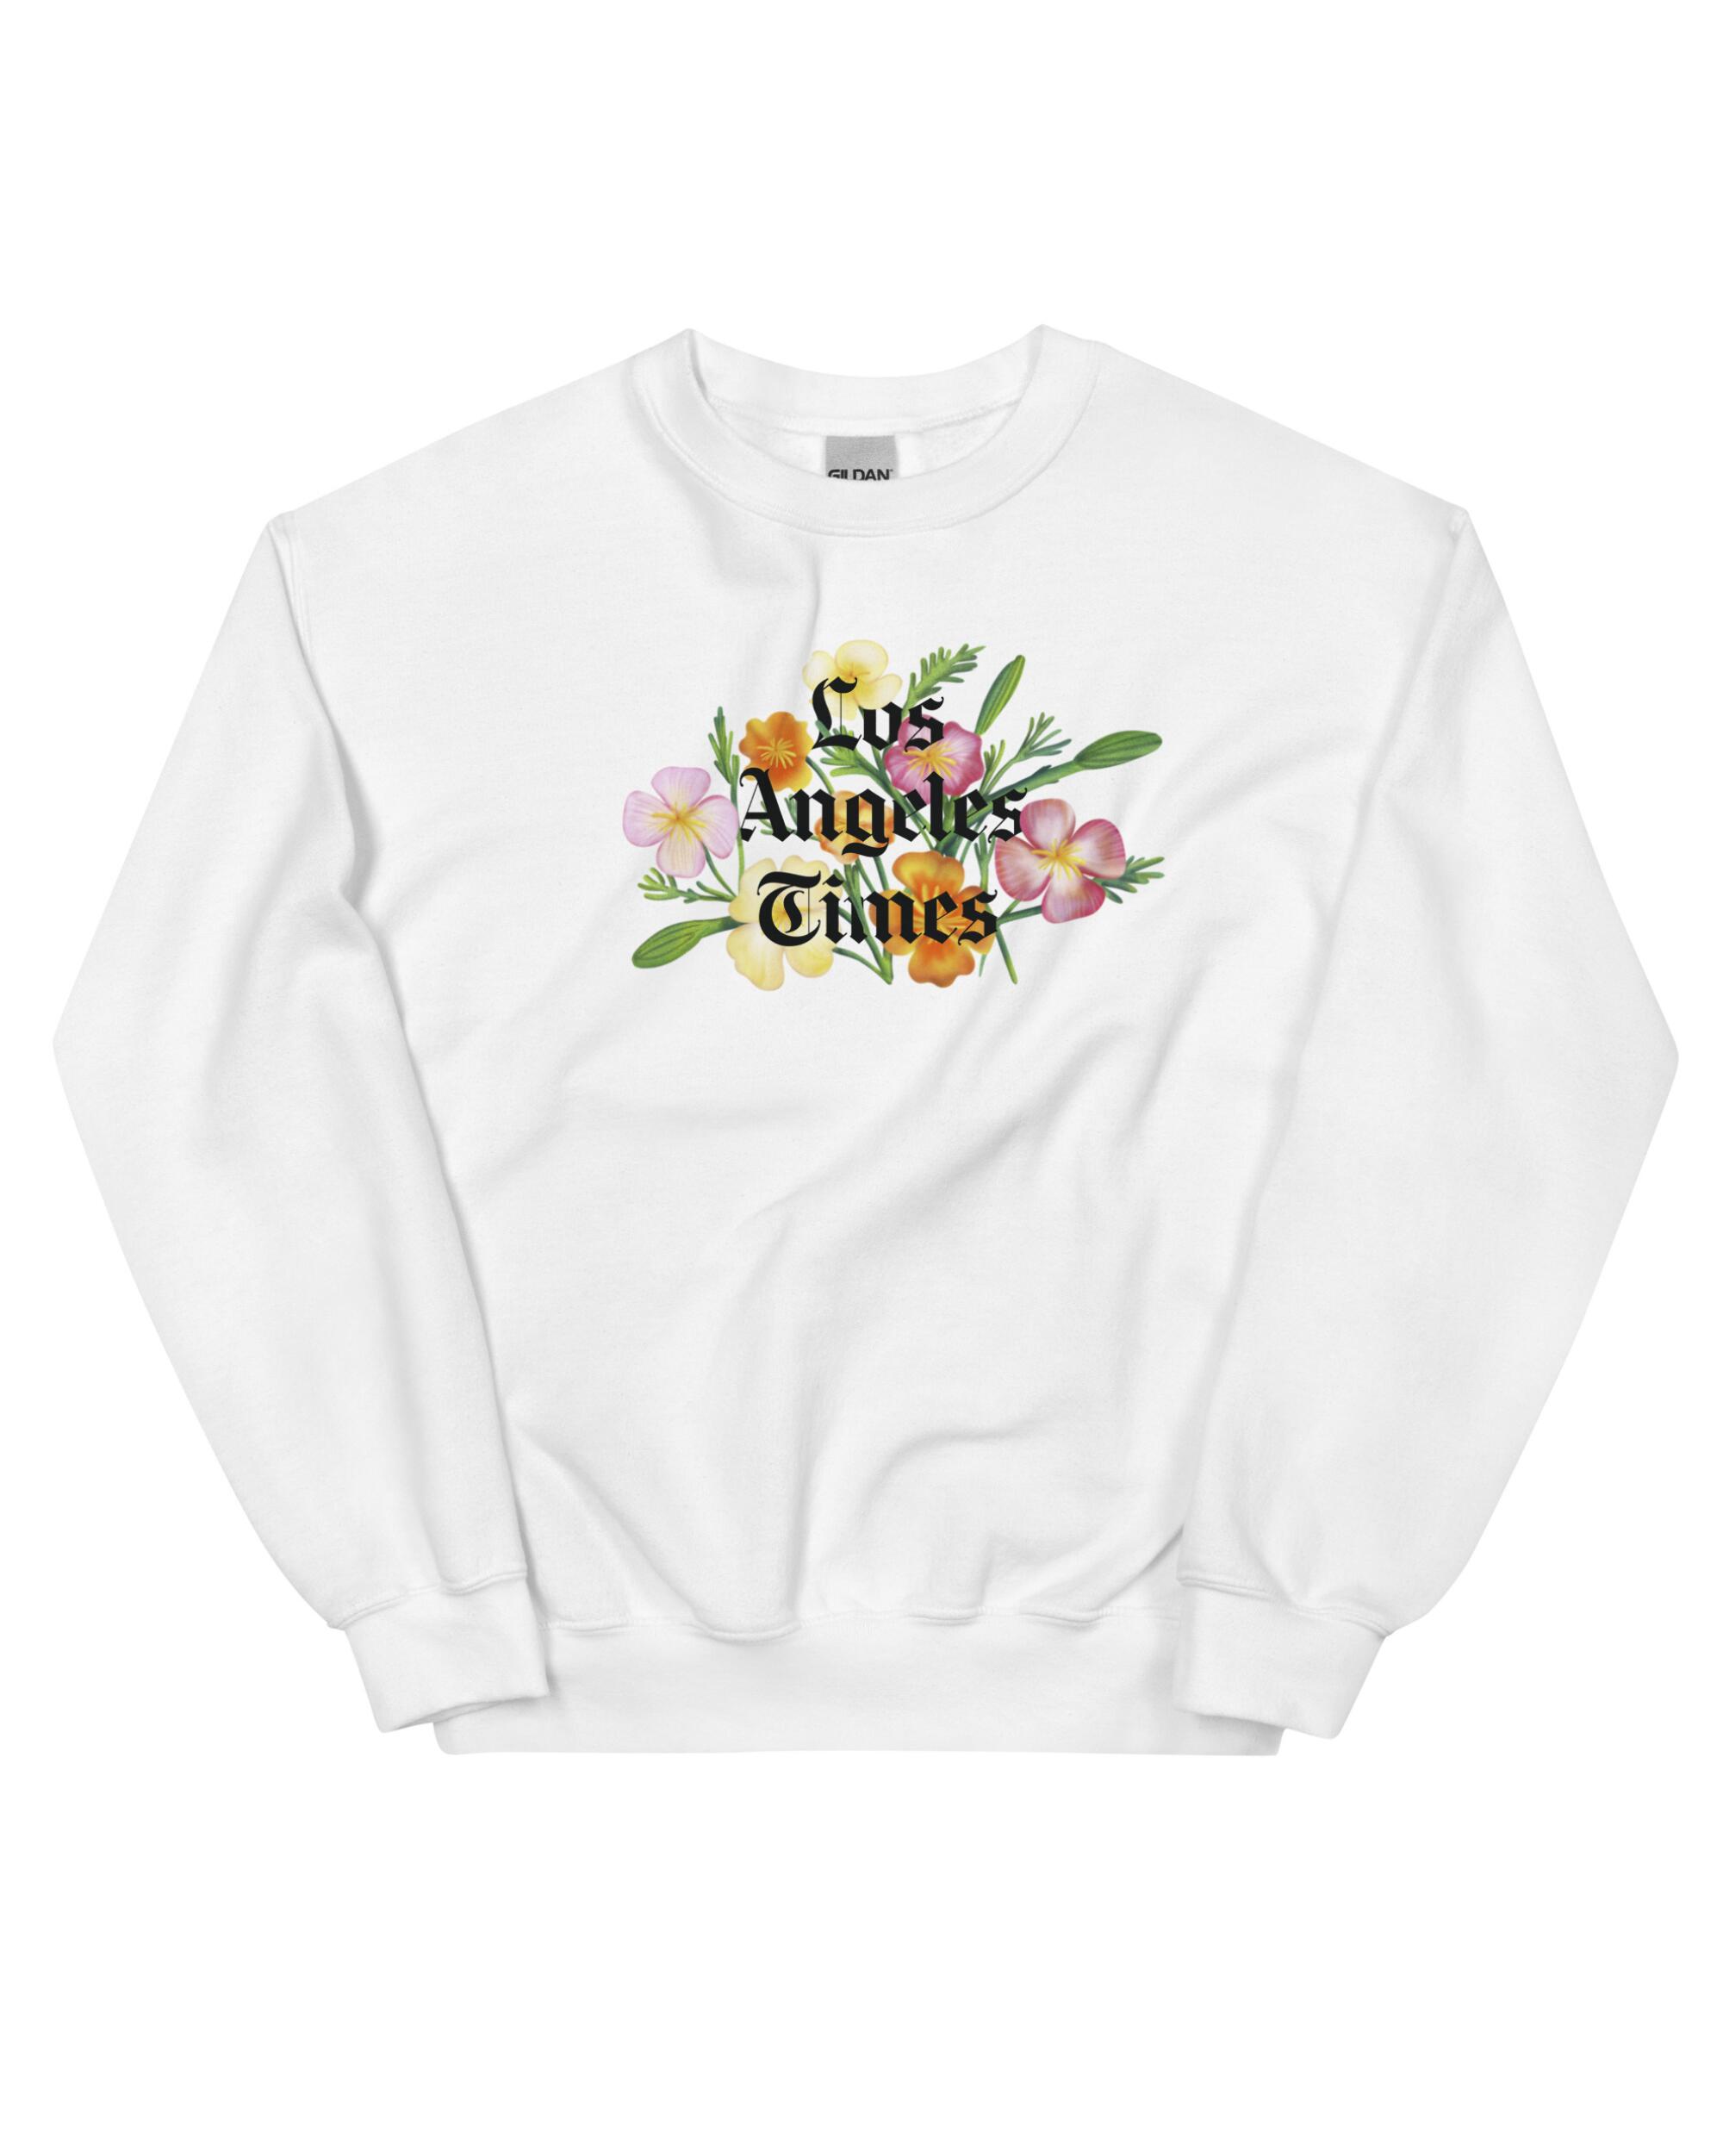 A floral crew neck sweater from the Los Angeles Times 